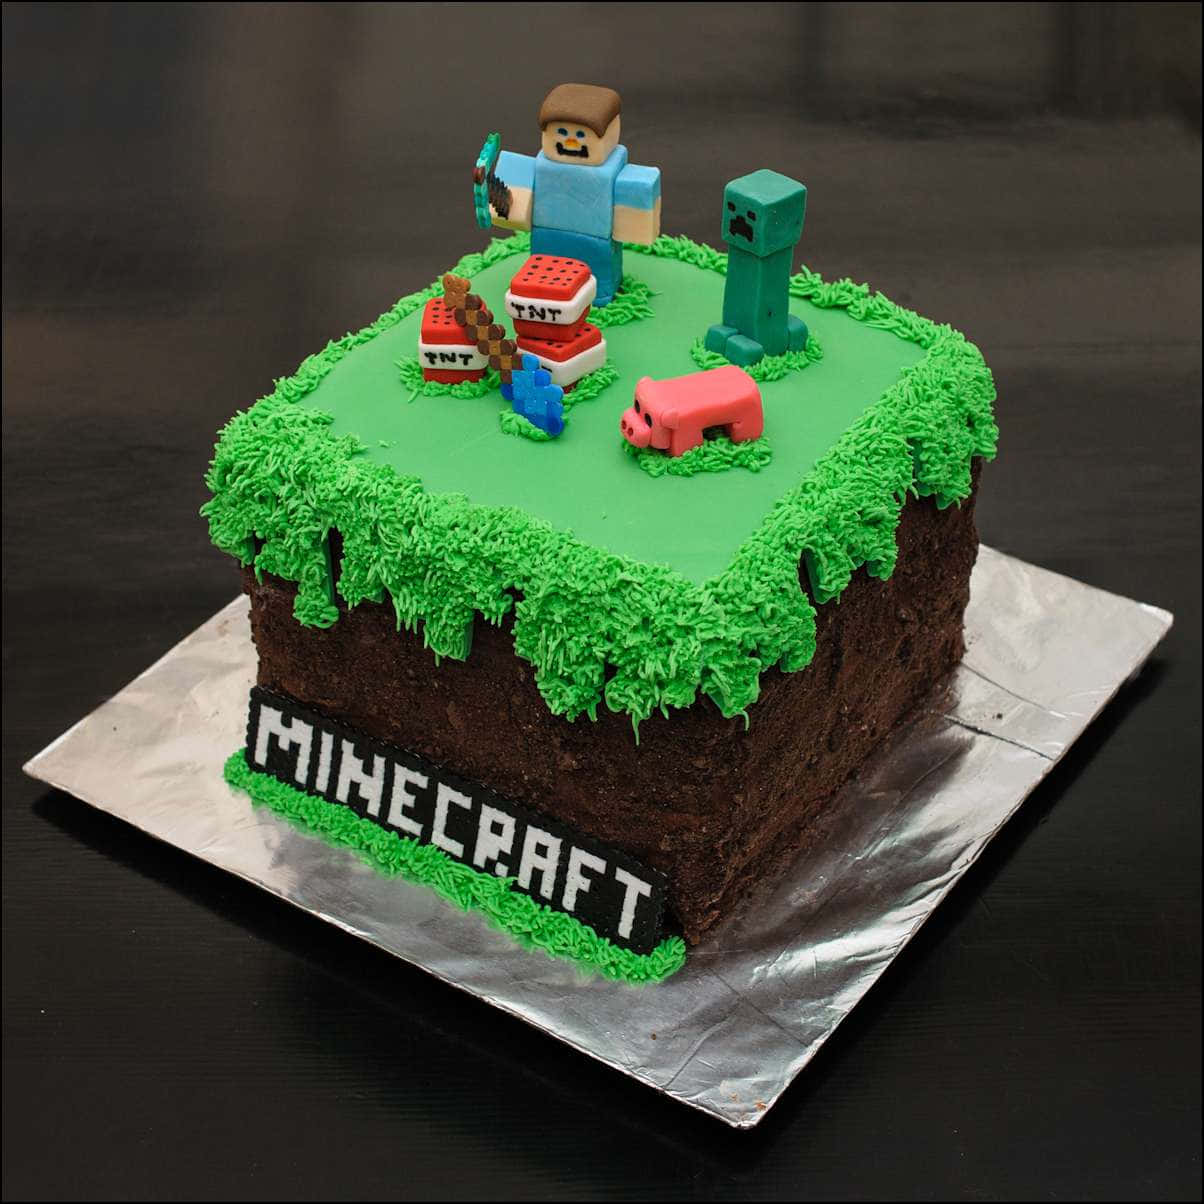 Minecraft Steve Cake Topper Figurine How to by Pink Cake Princess - YouTube